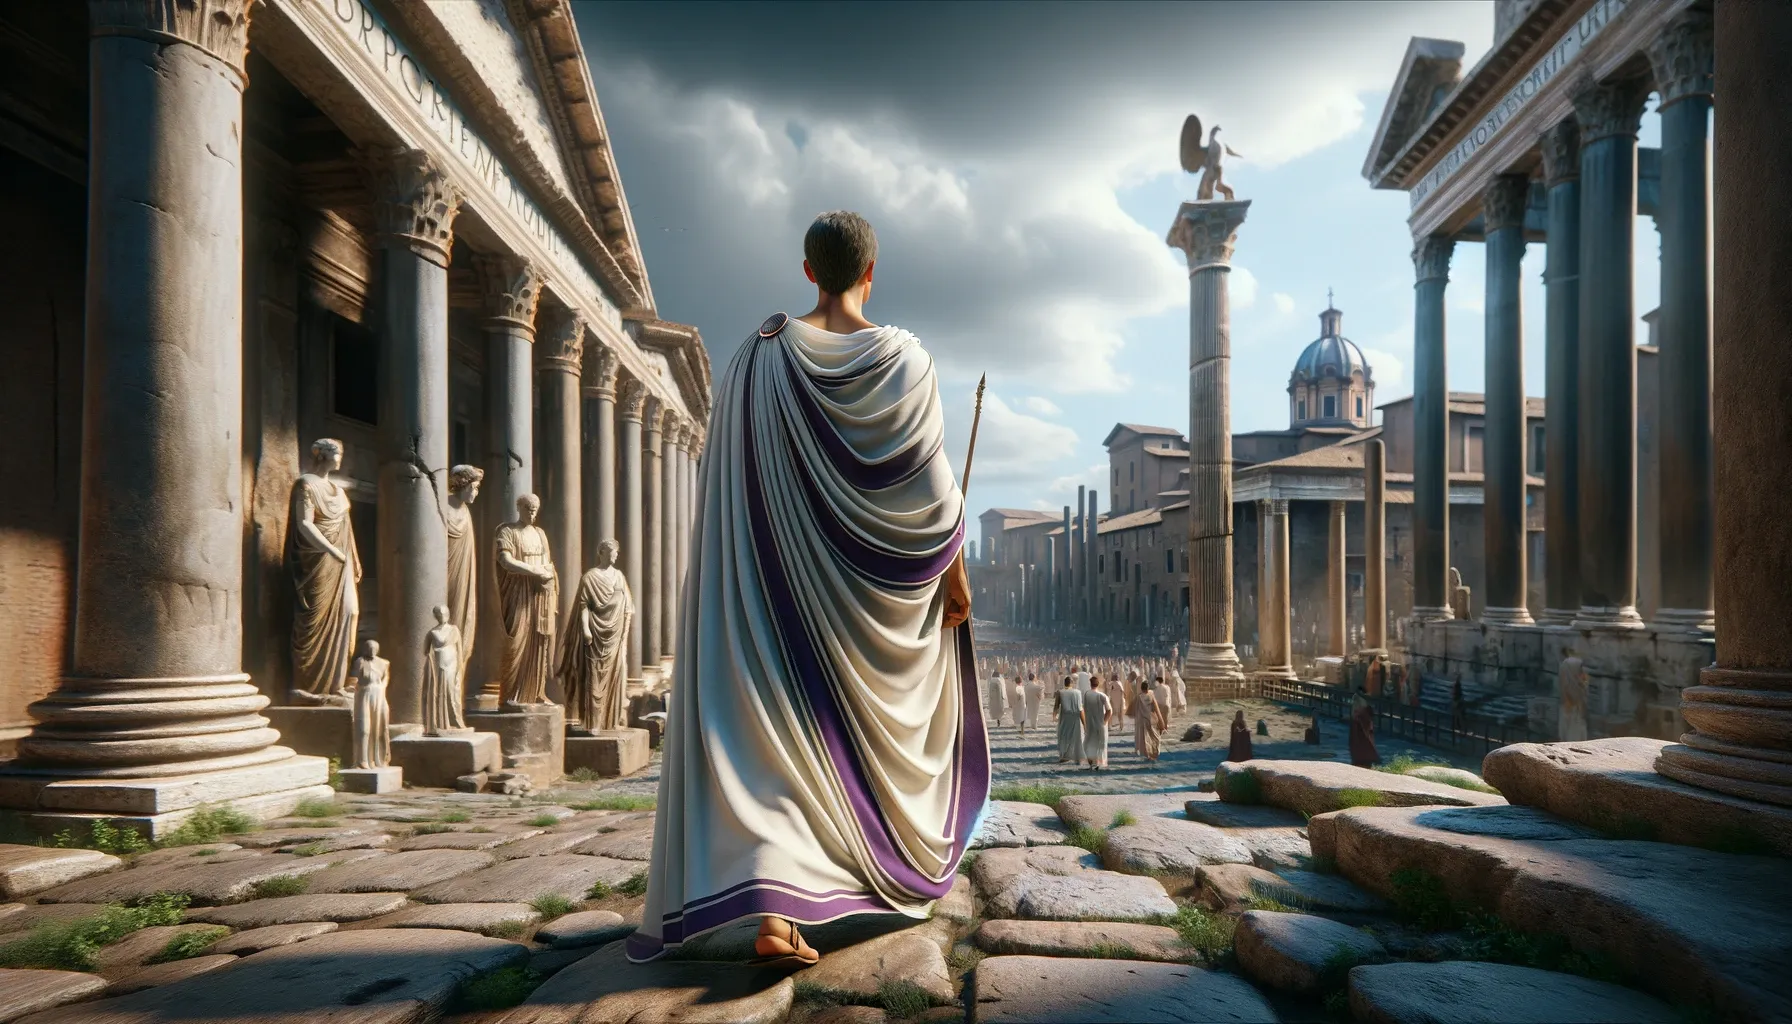 A higher-ranking official, wearing a toga praetexta and walking through the Roman Forum